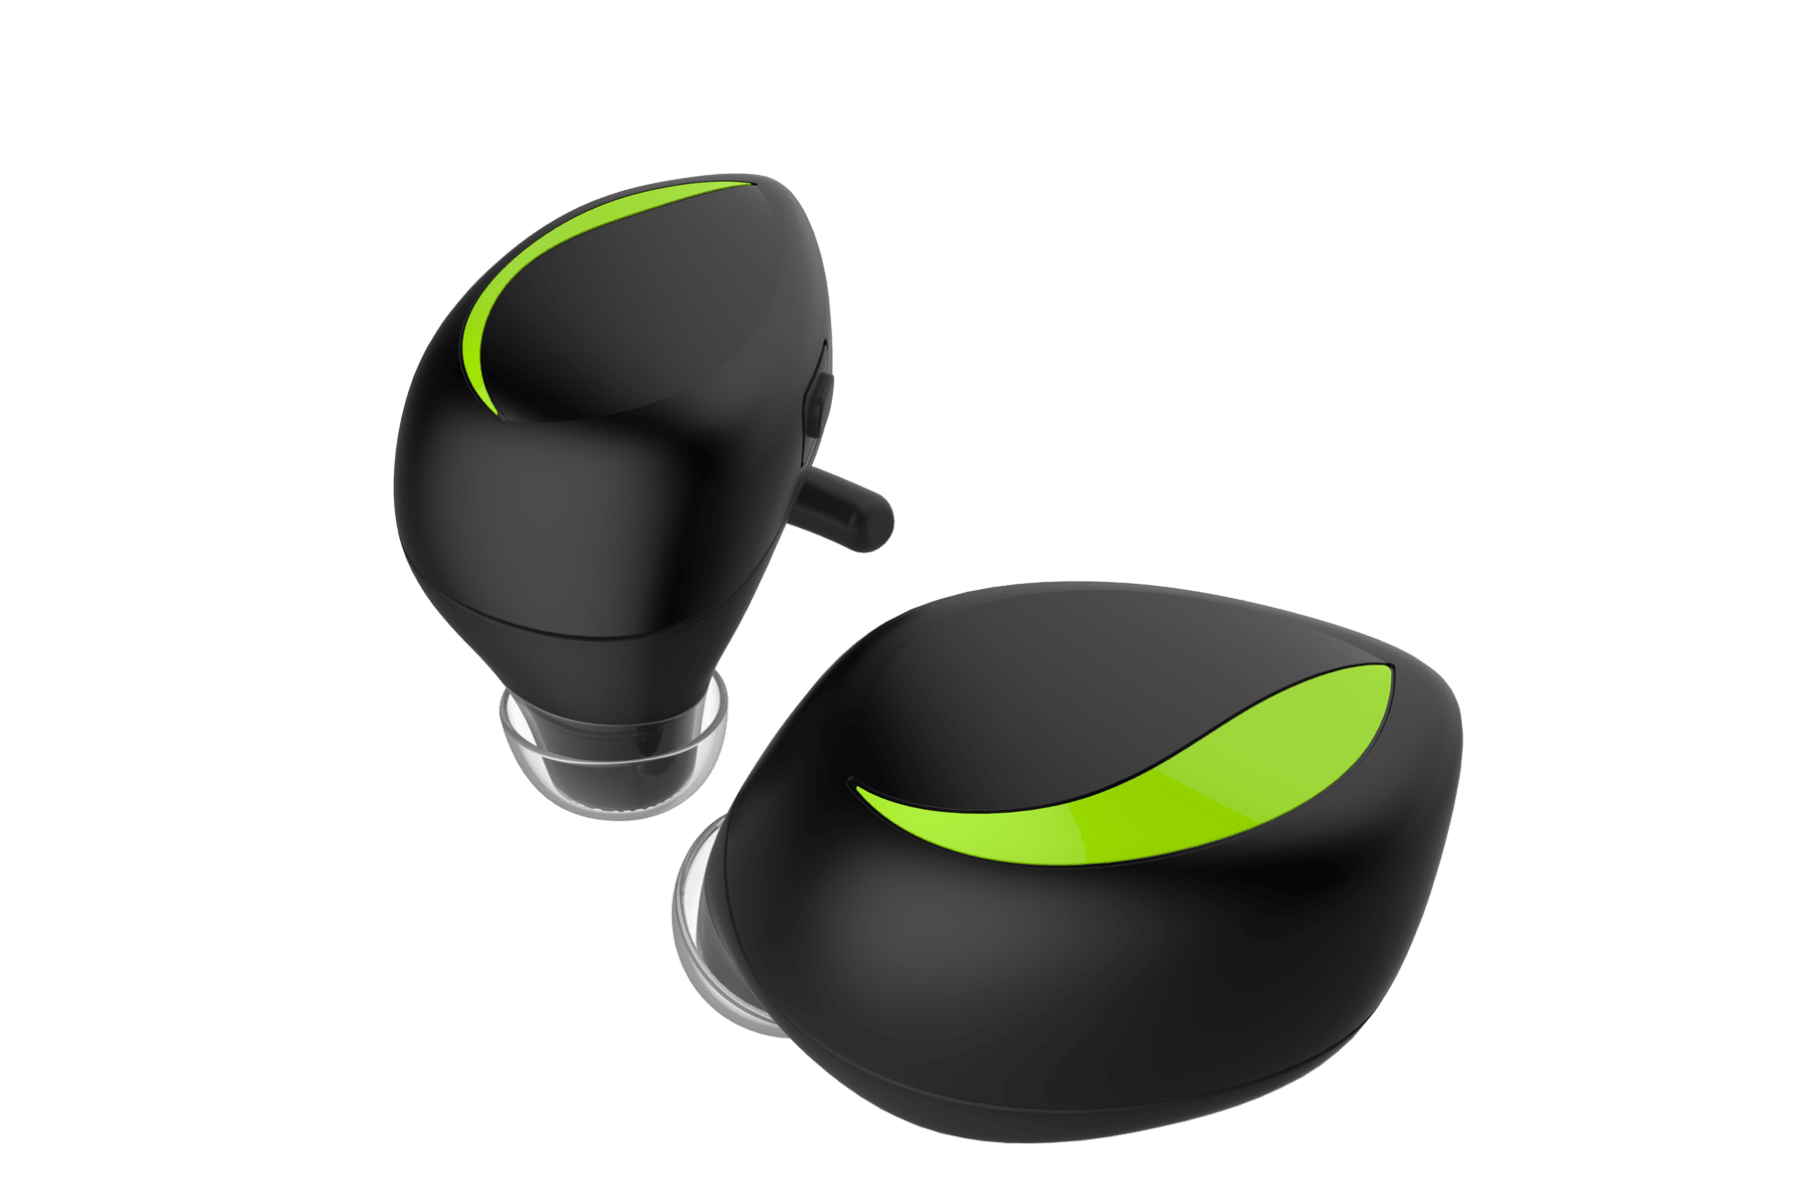 These totally wireless earbuds were a smash on Indiegogo